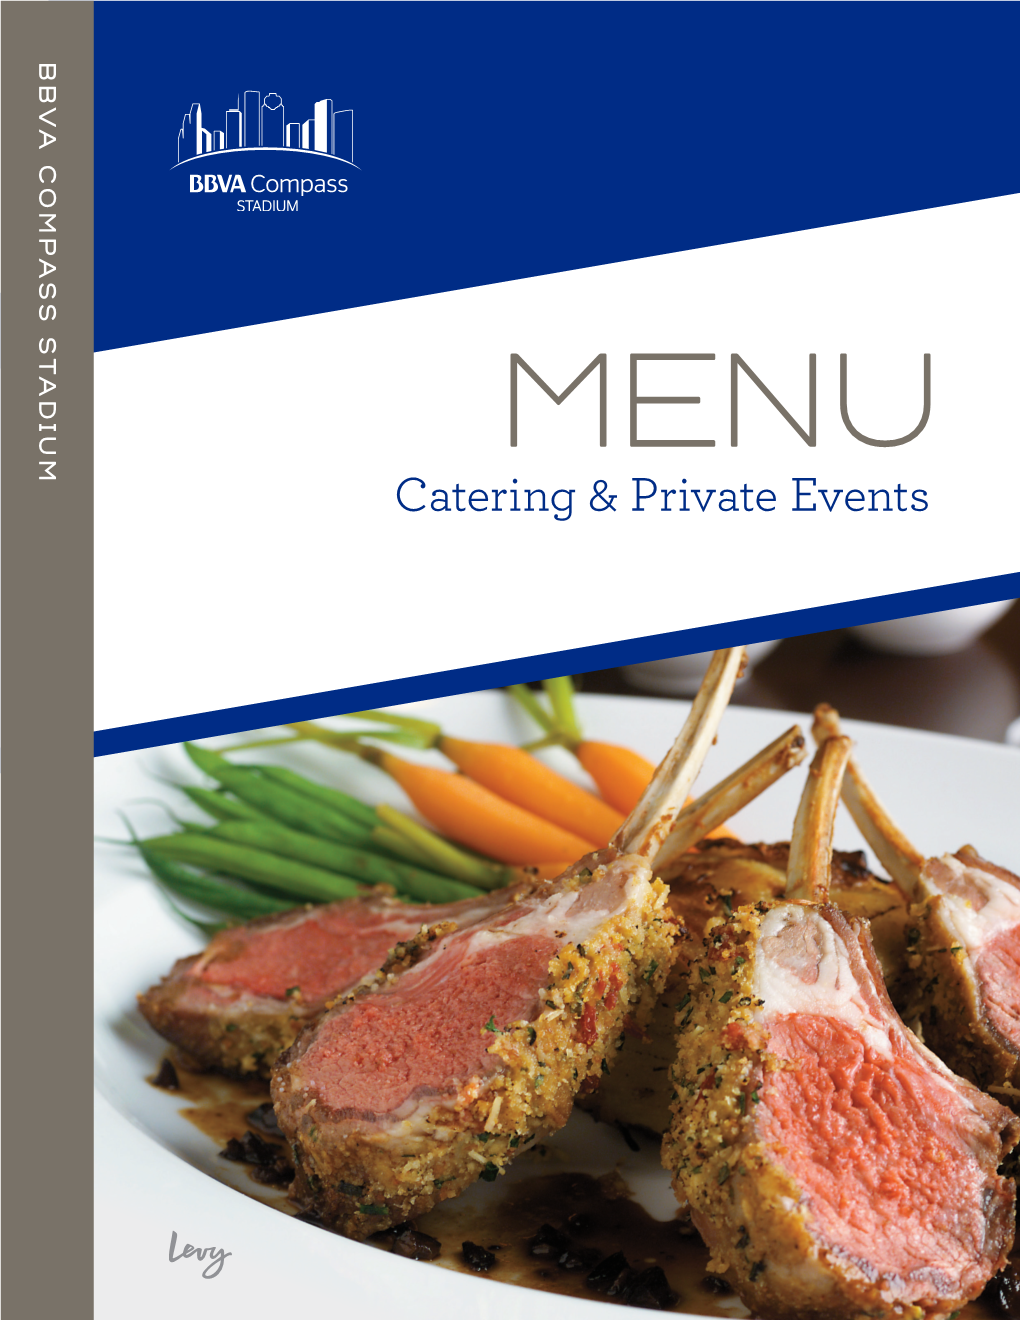 Catering & Private Events